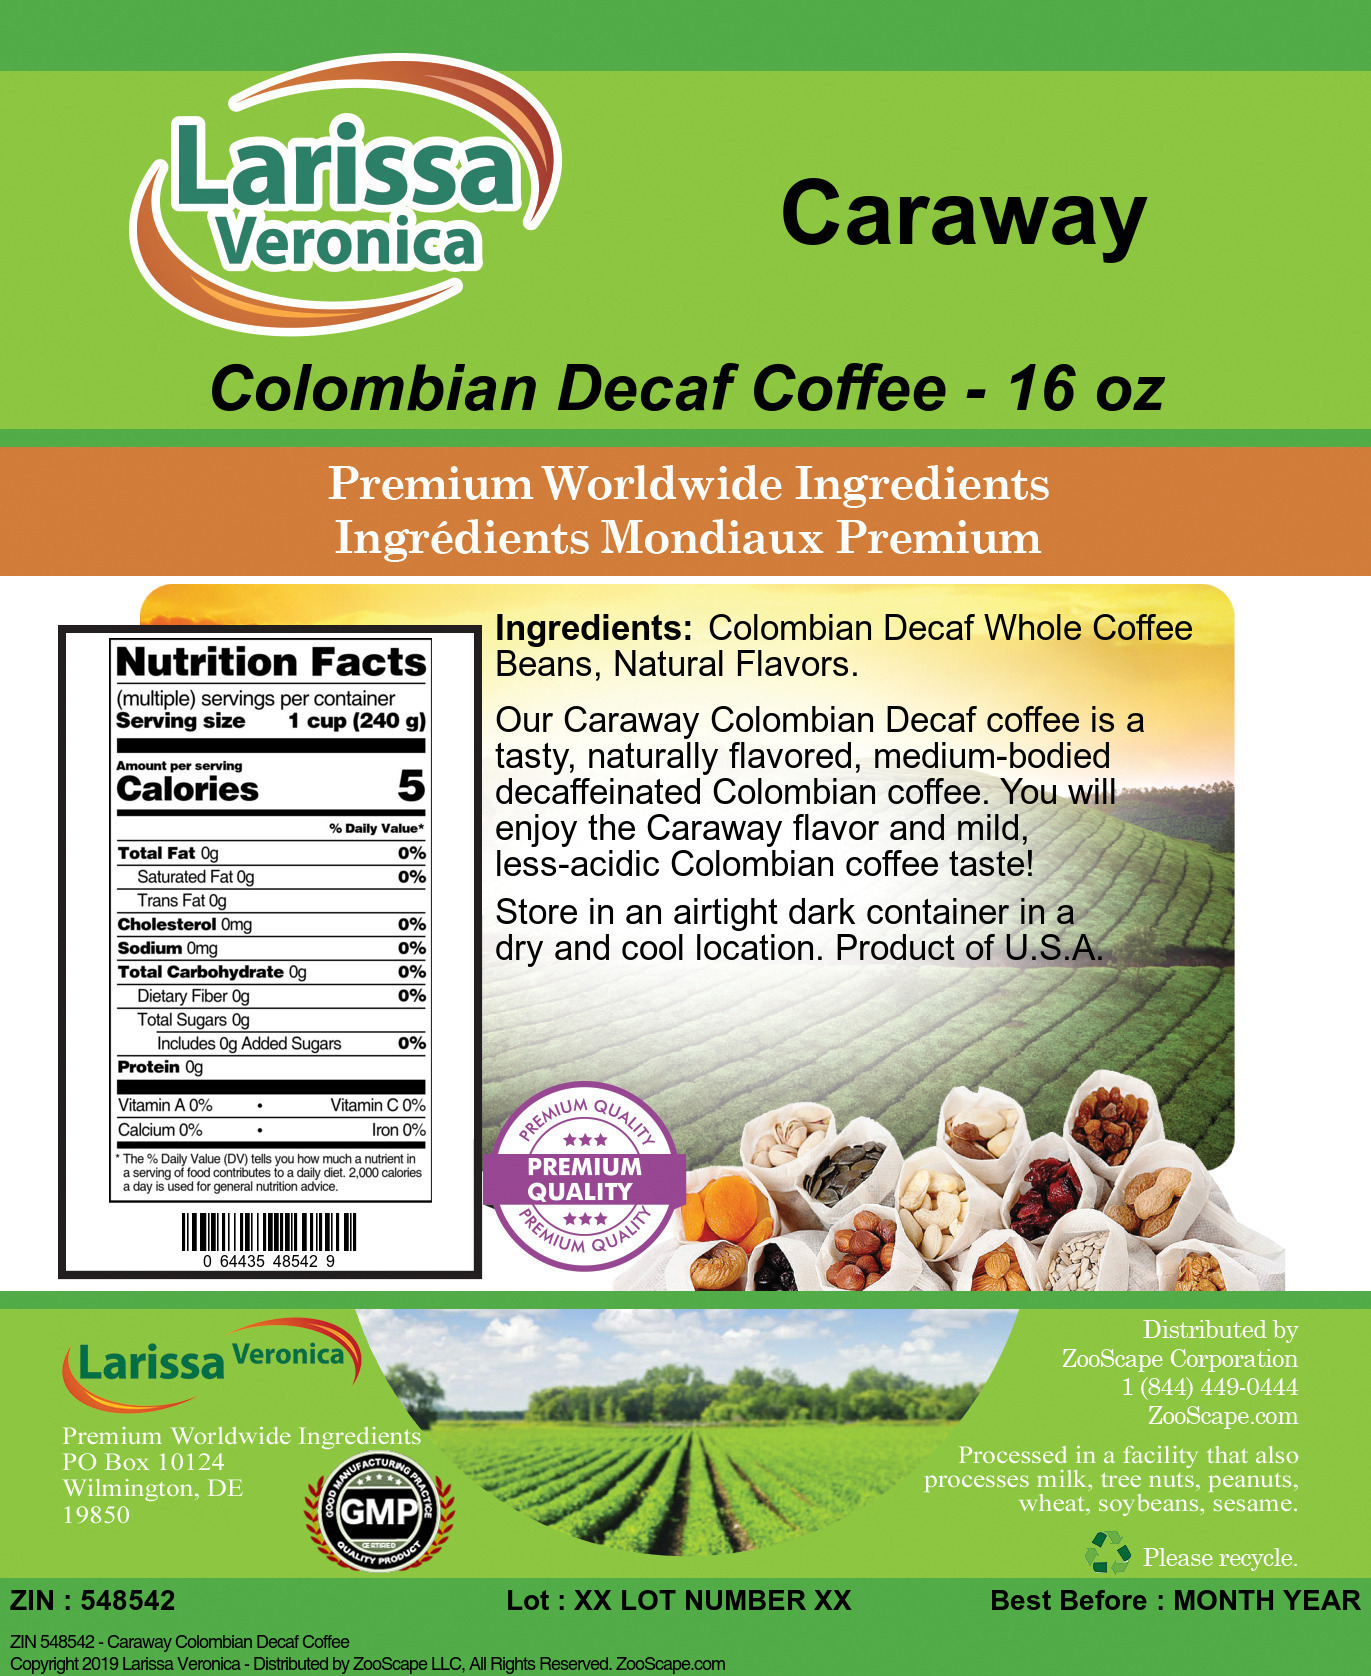 Caraway Colombian Decaf Coffee - Label